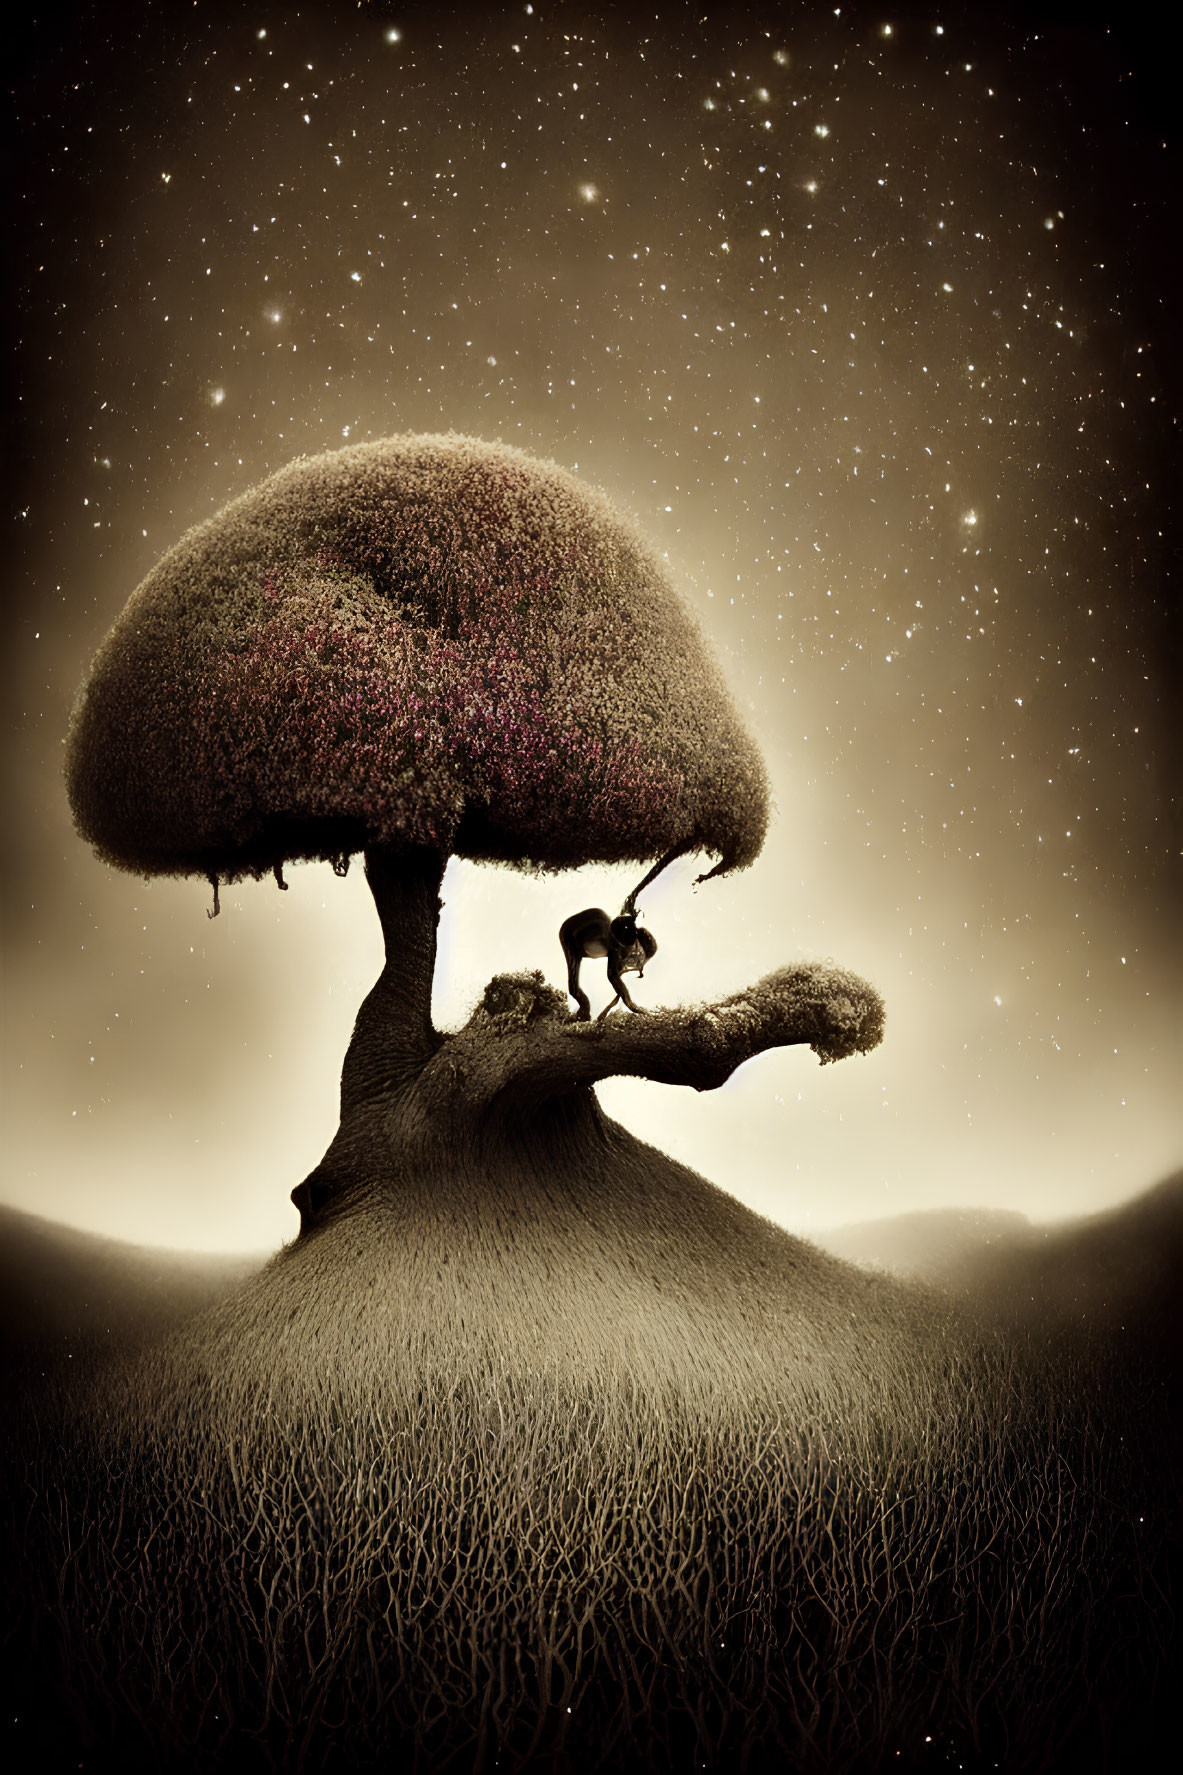 Surreal lone tree resembling a mushroom with person silhouette under starlit sky